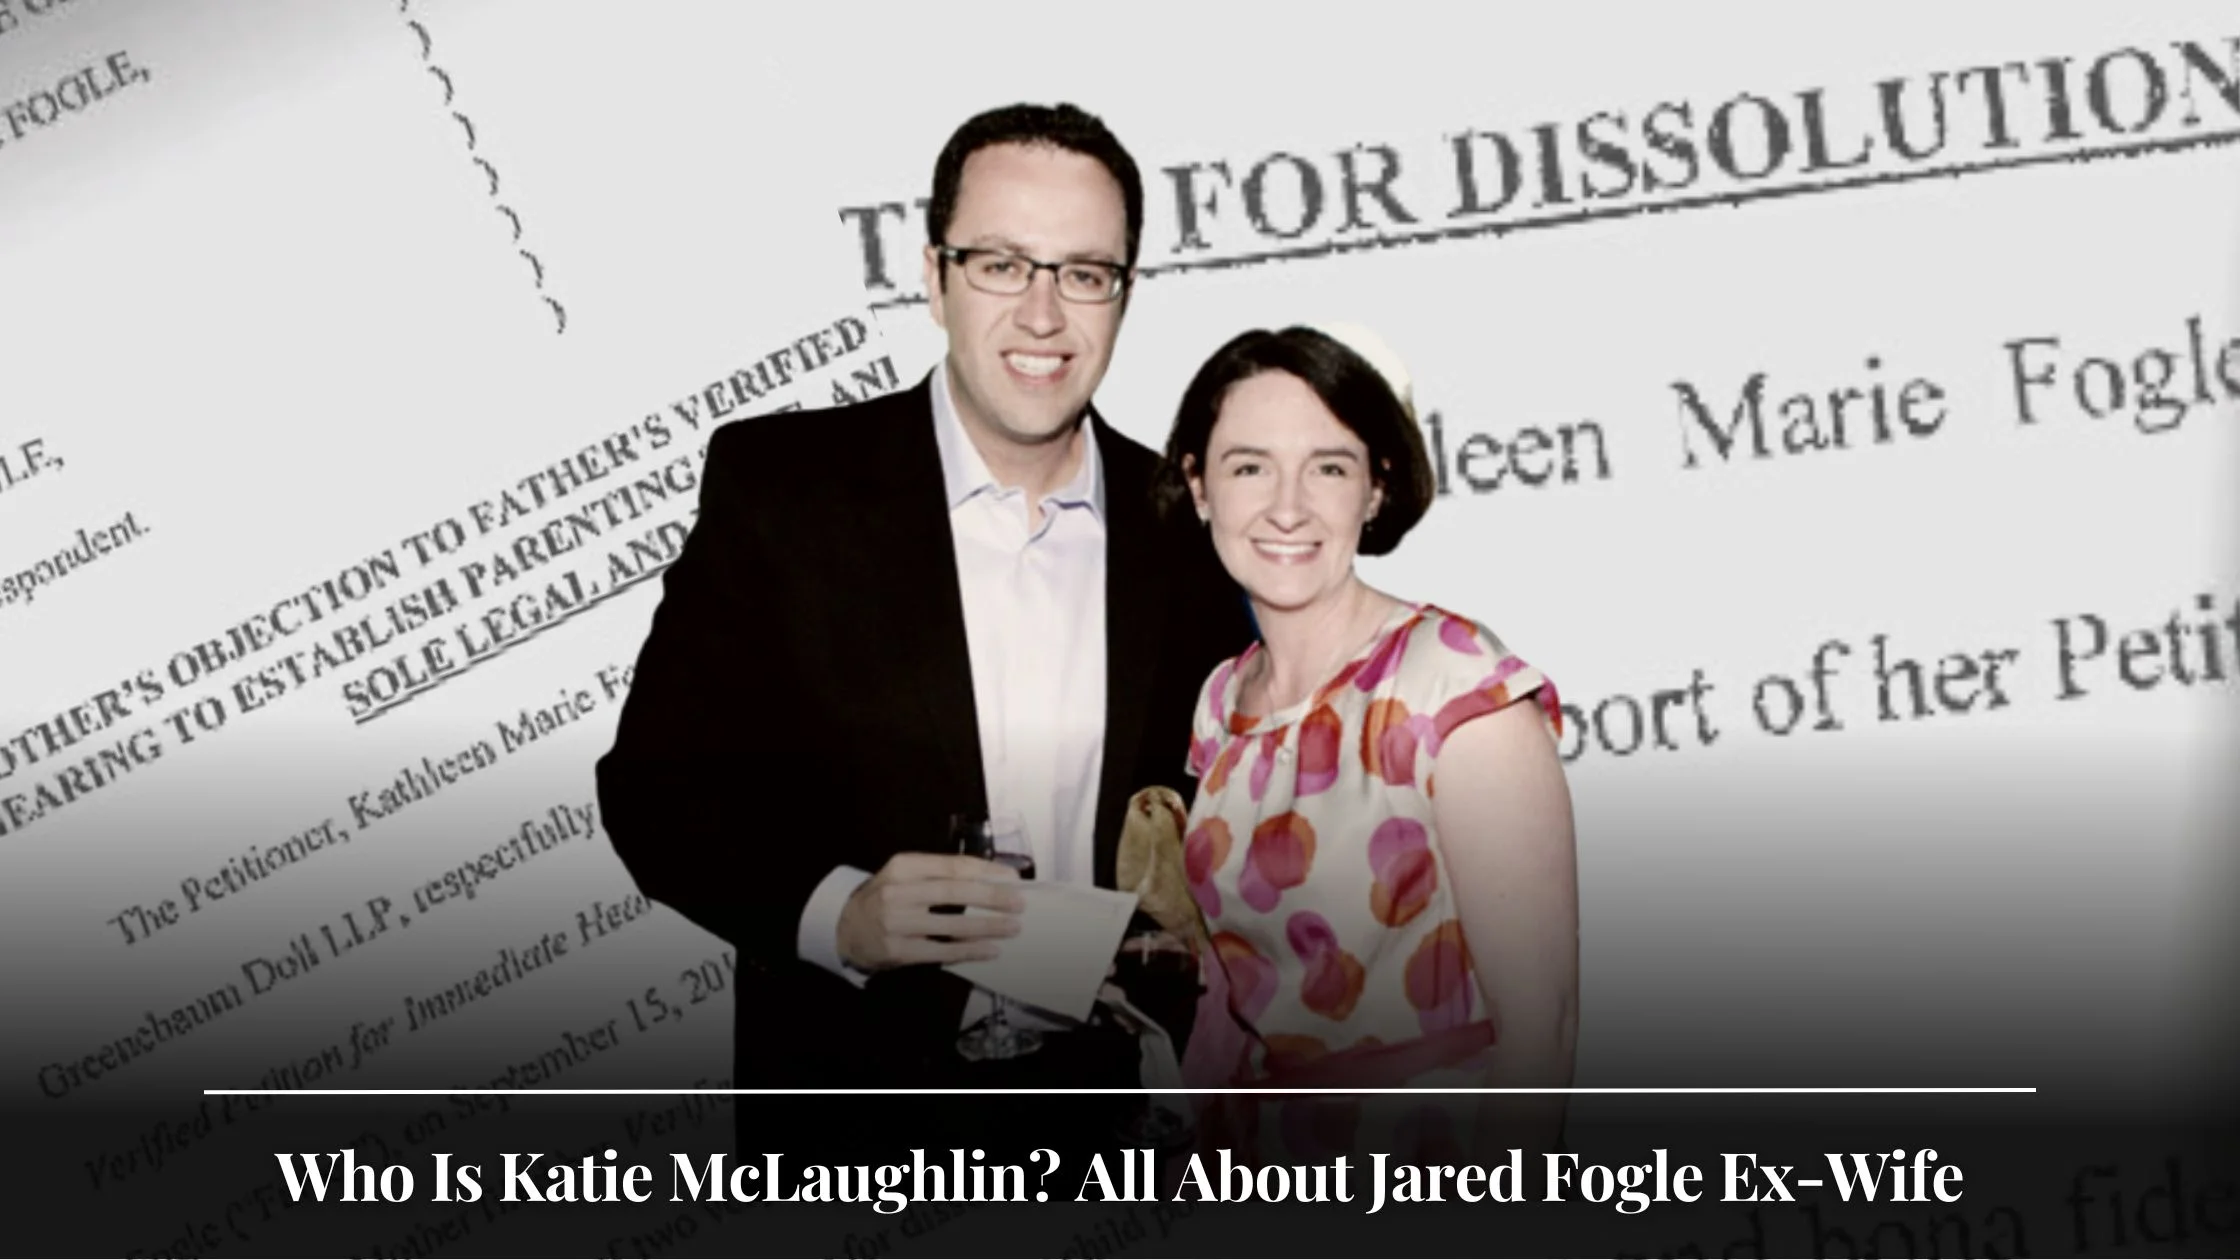 Who Is Katie McLaughlin All About Jared Fogle Ex-Wife